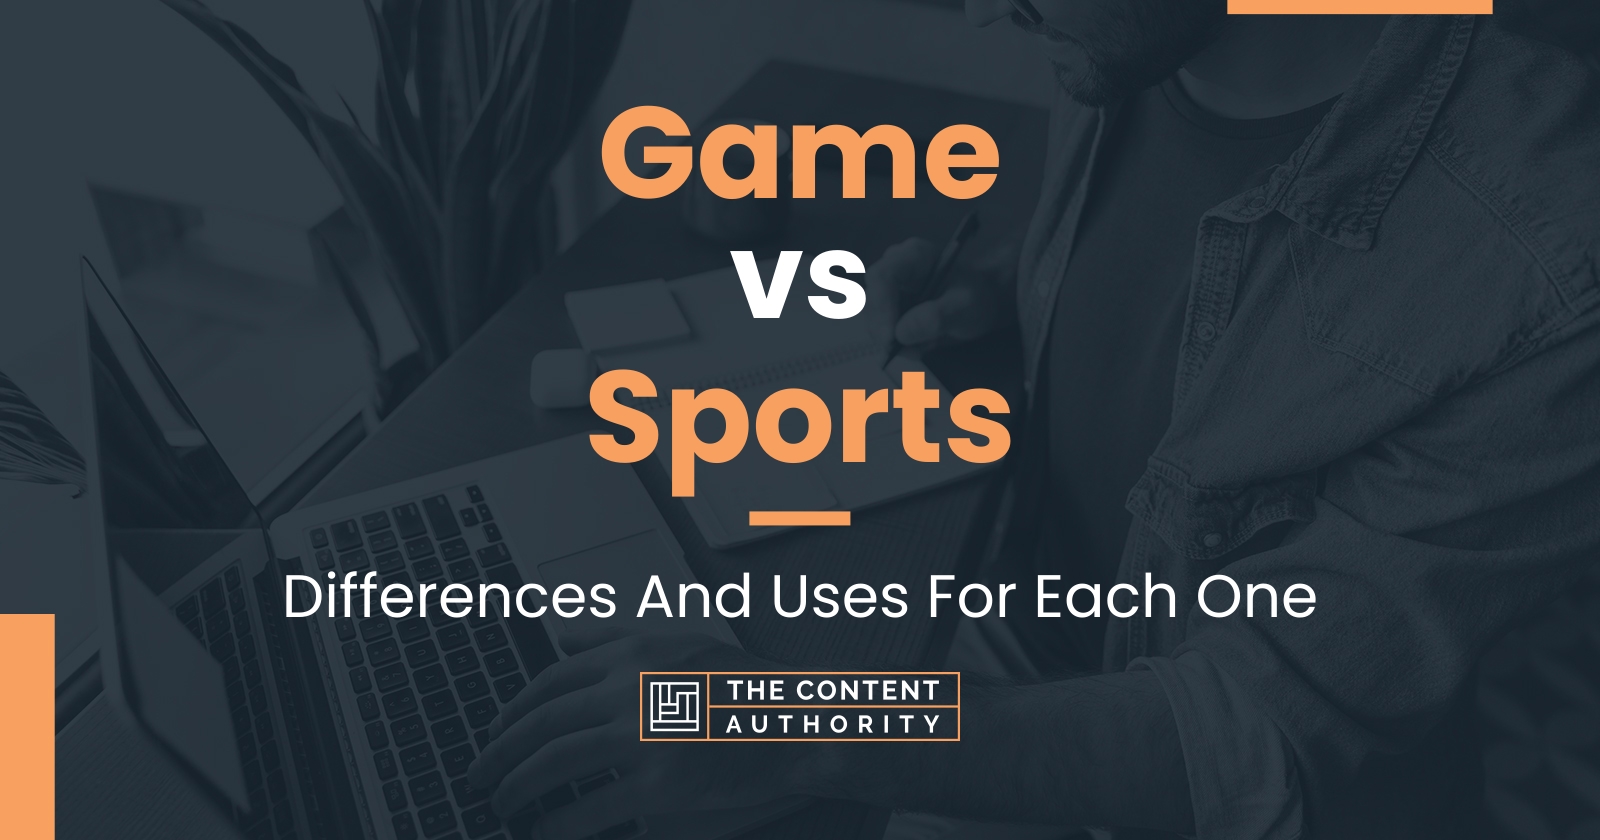 Game vs Sports: Differences And Uses For Each One